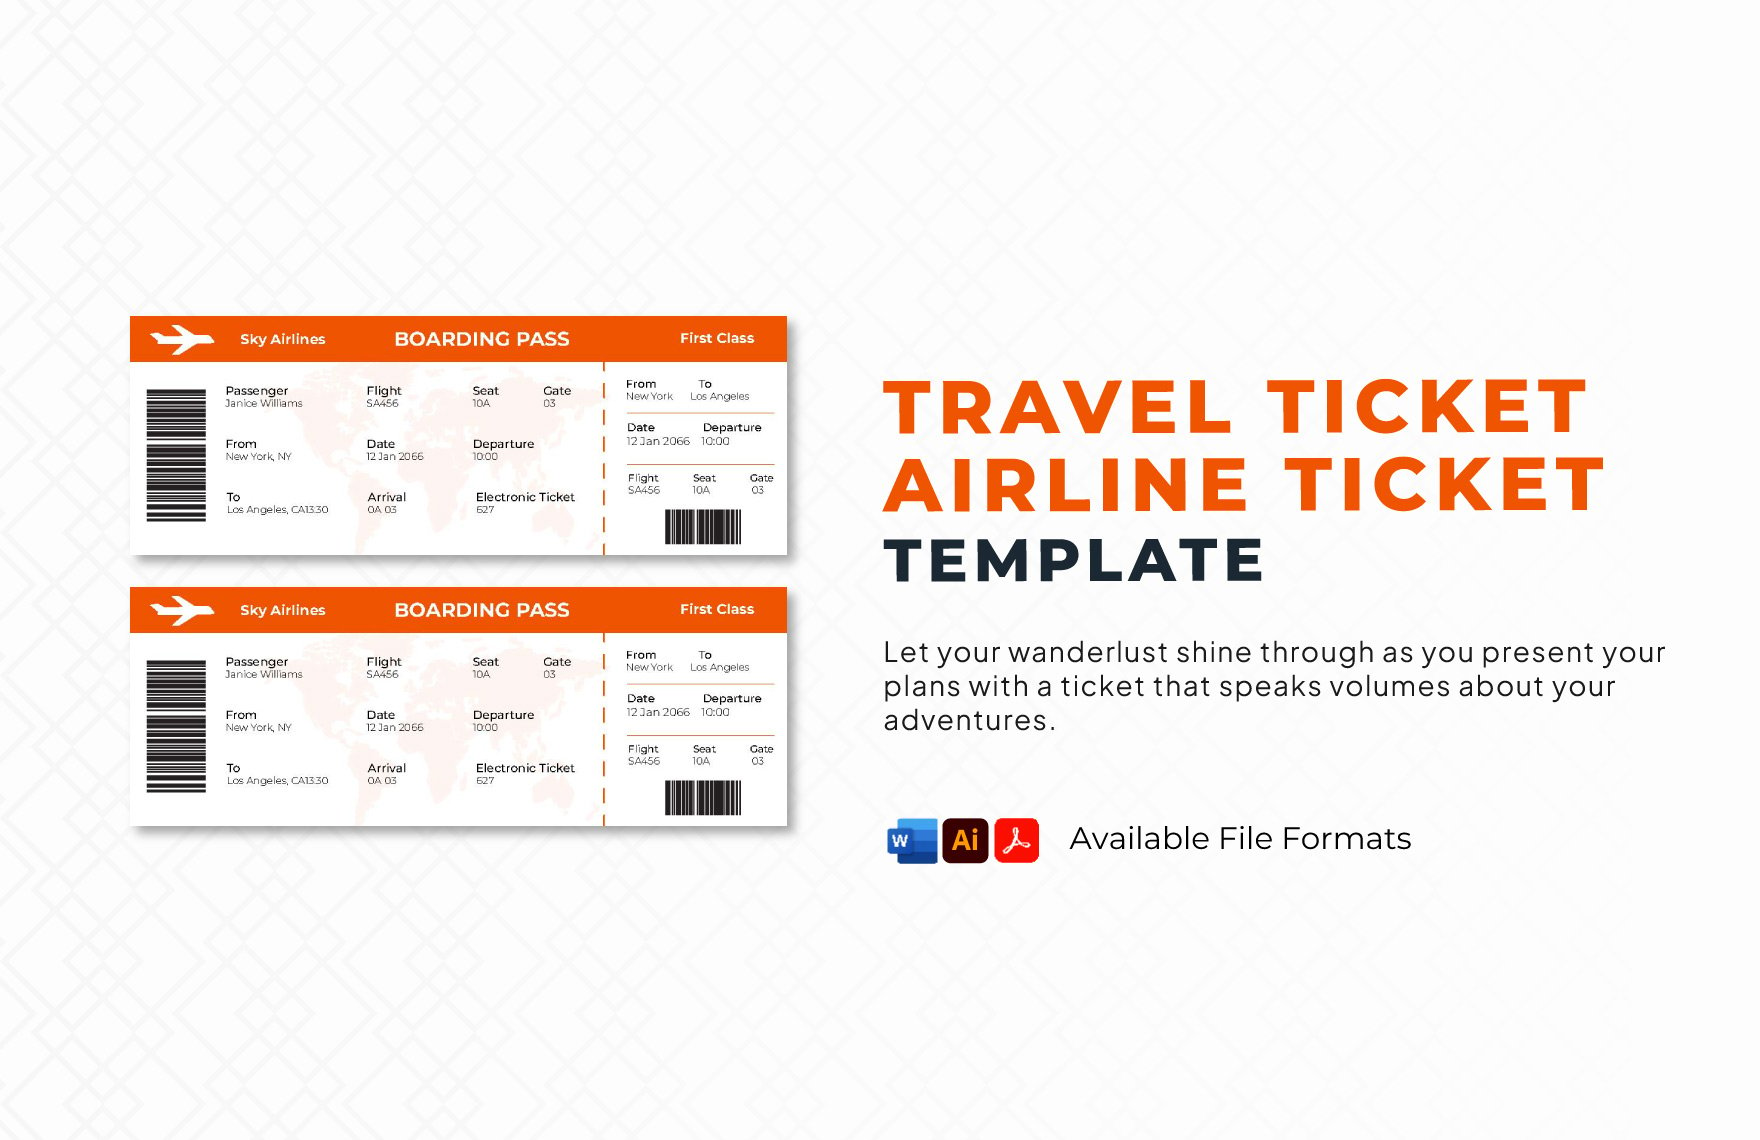 Travel Ticket Airline Ticket Template